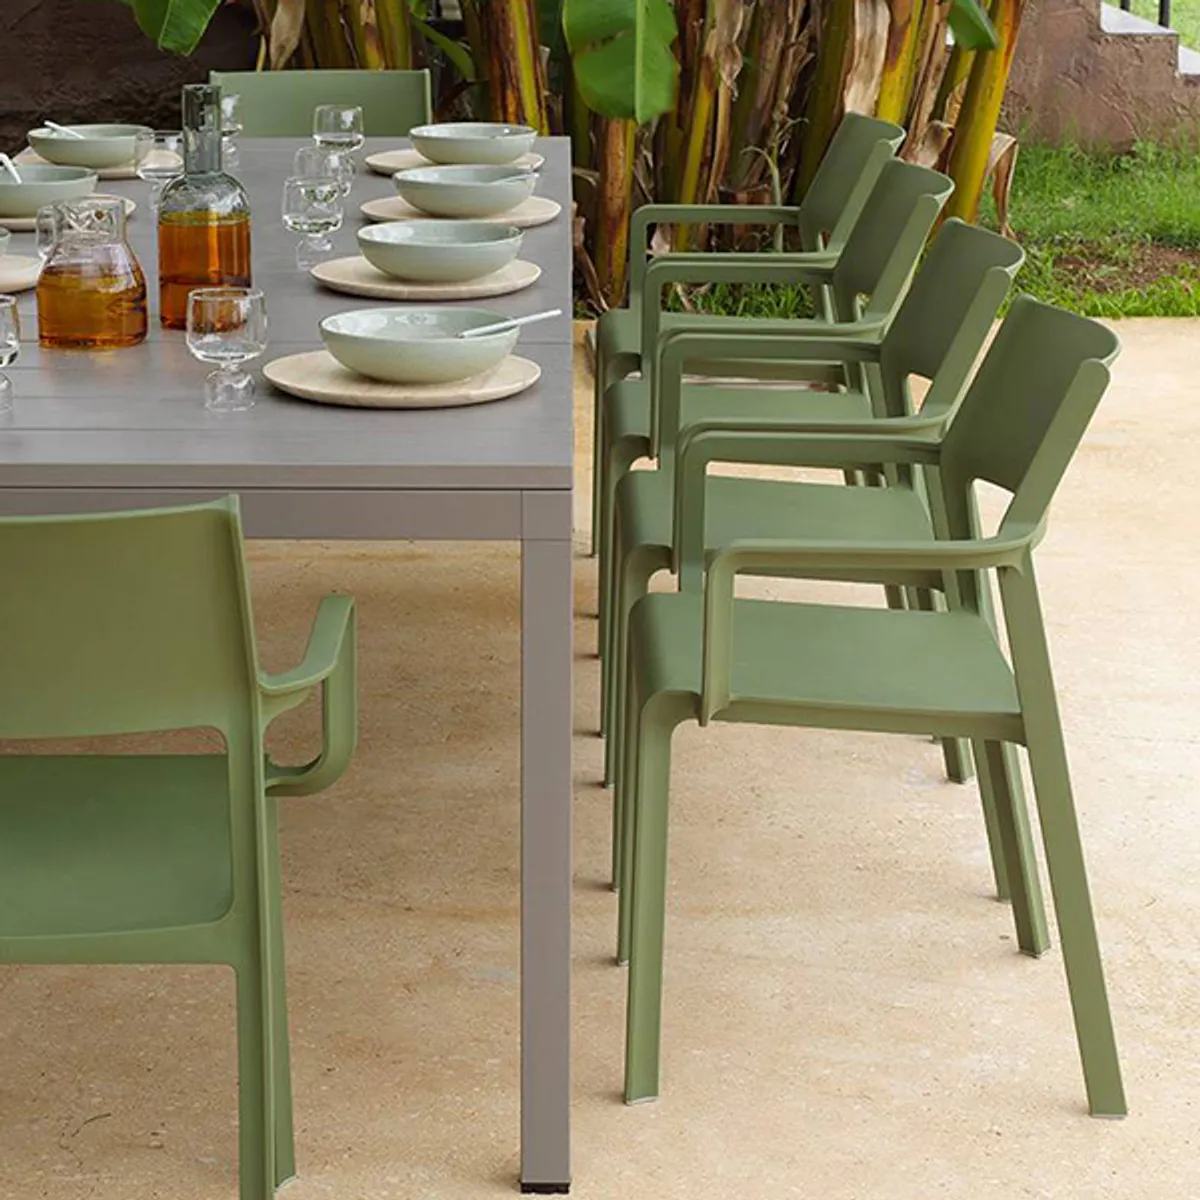 Trill Armchair At The Dining Table Outdoor Furniture By Insideoutcontracts